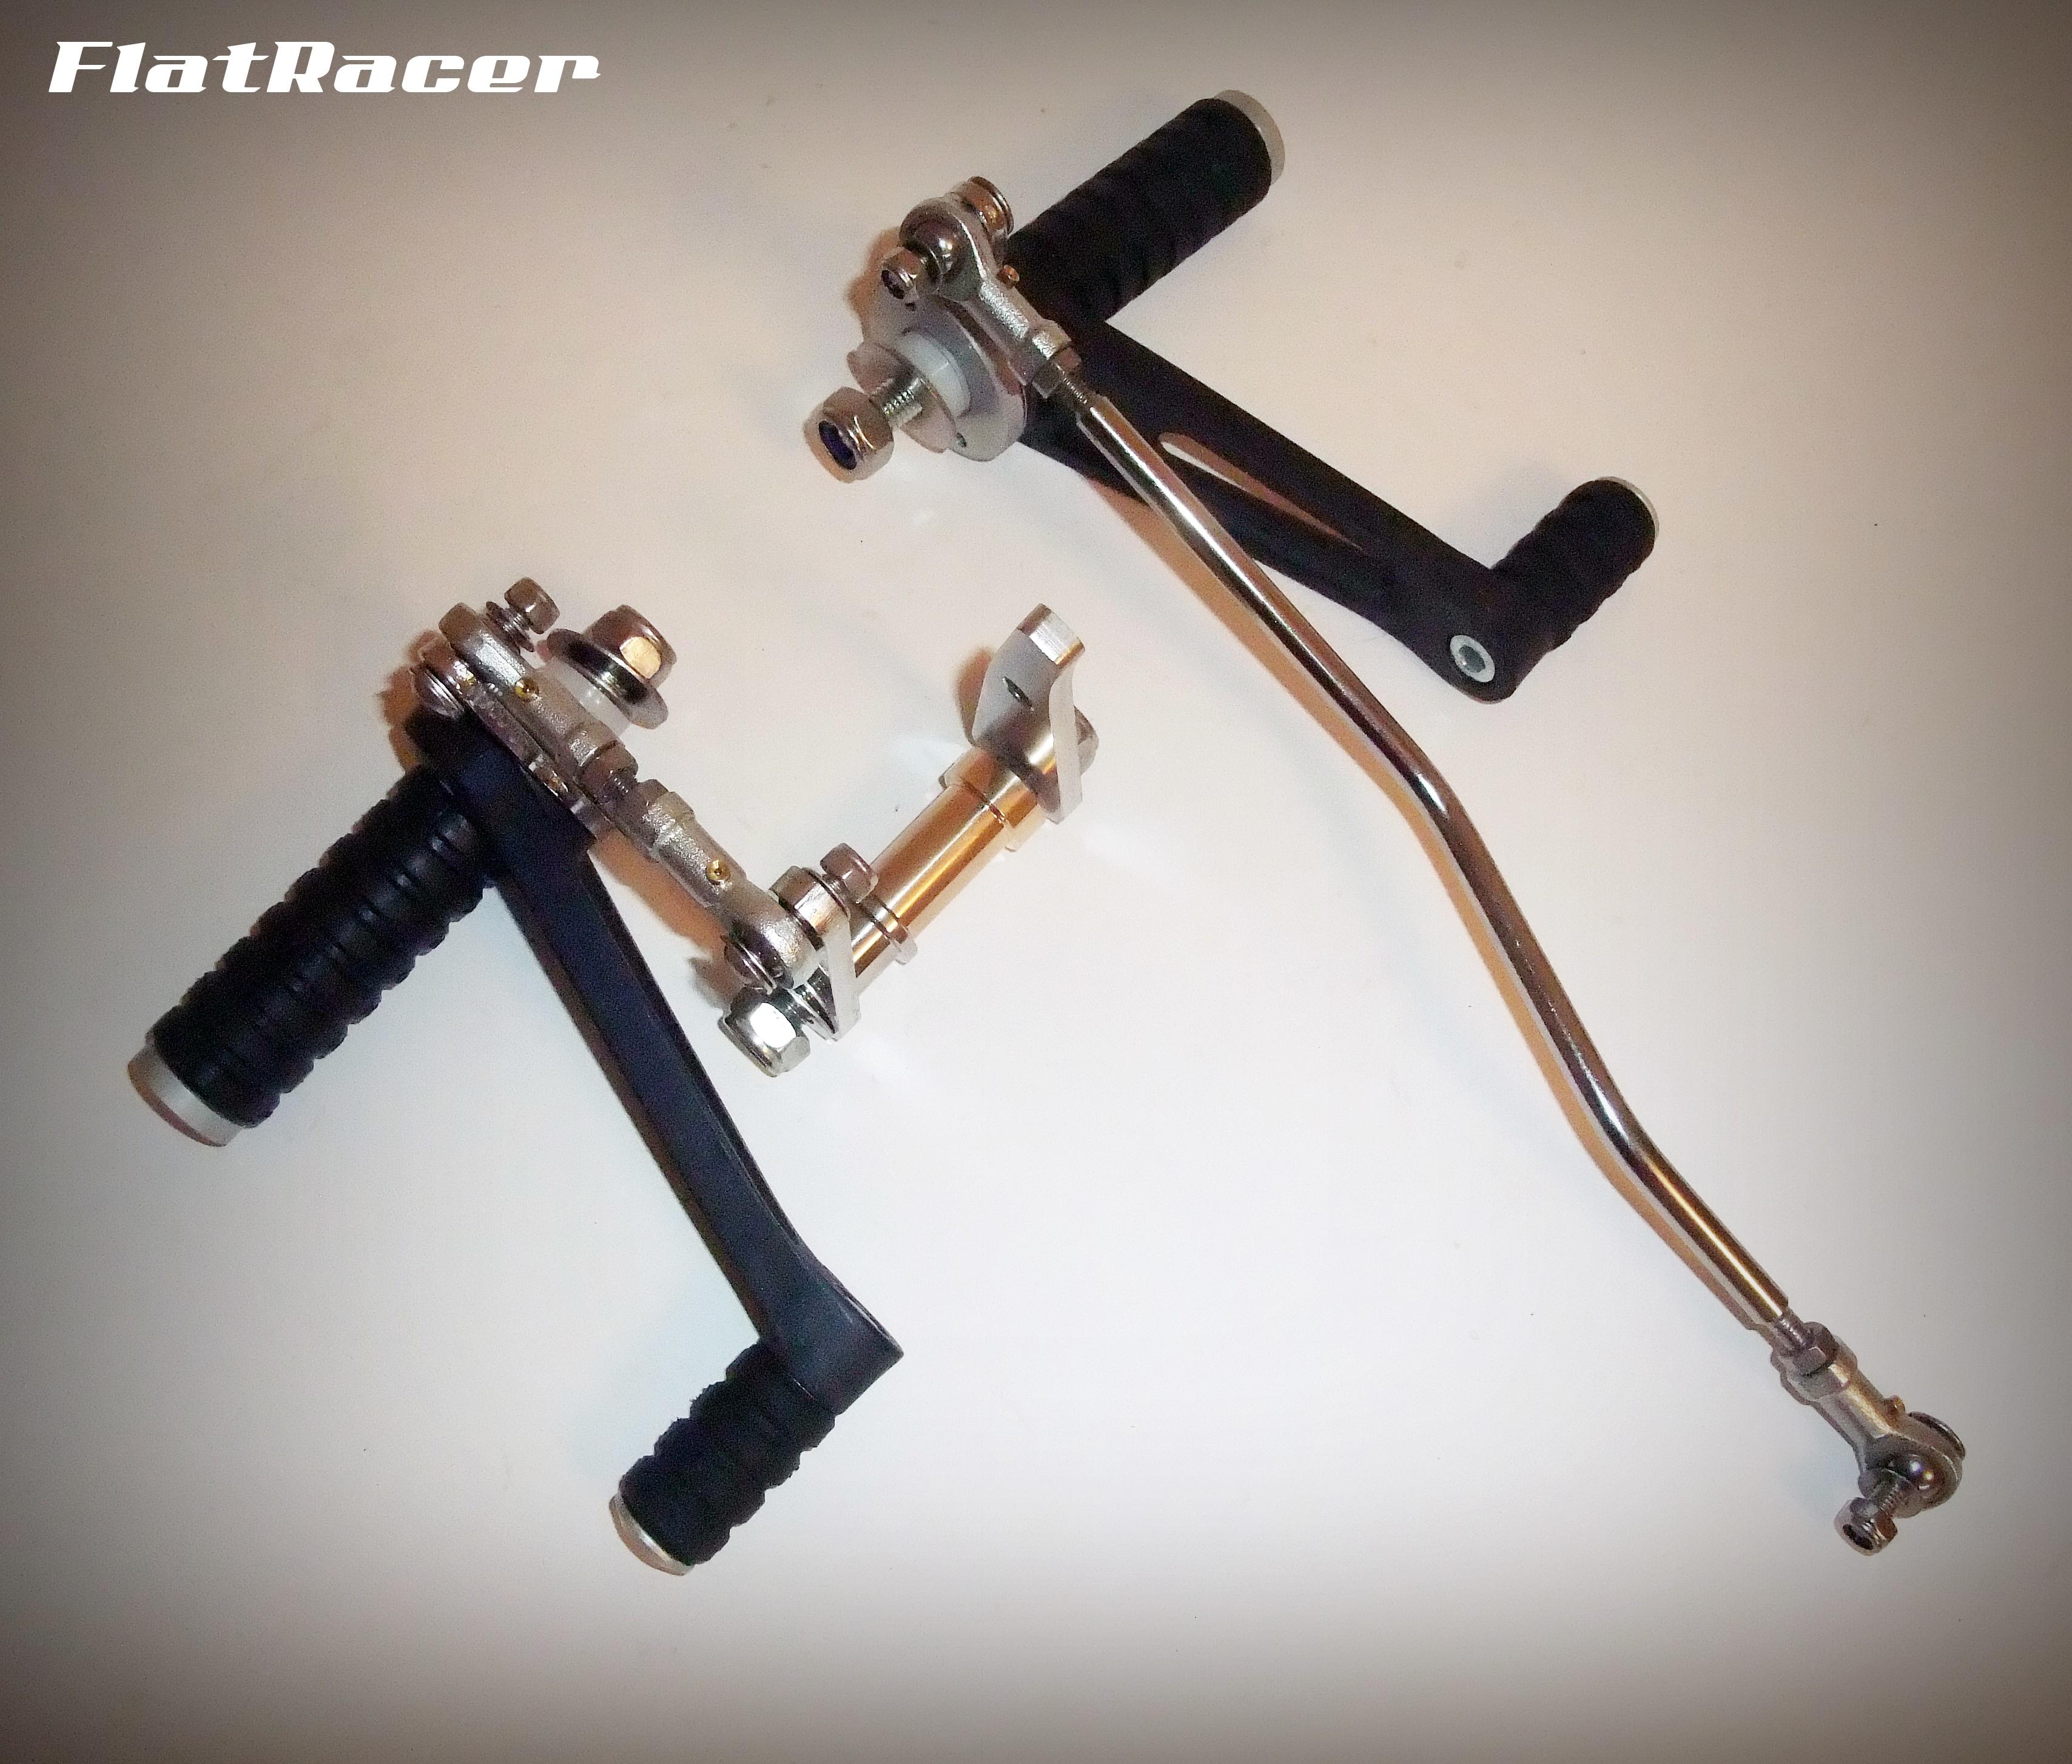 FlatRacer BMW R2v Airhead Boxer early /7 Series (1978-1980) rear sets